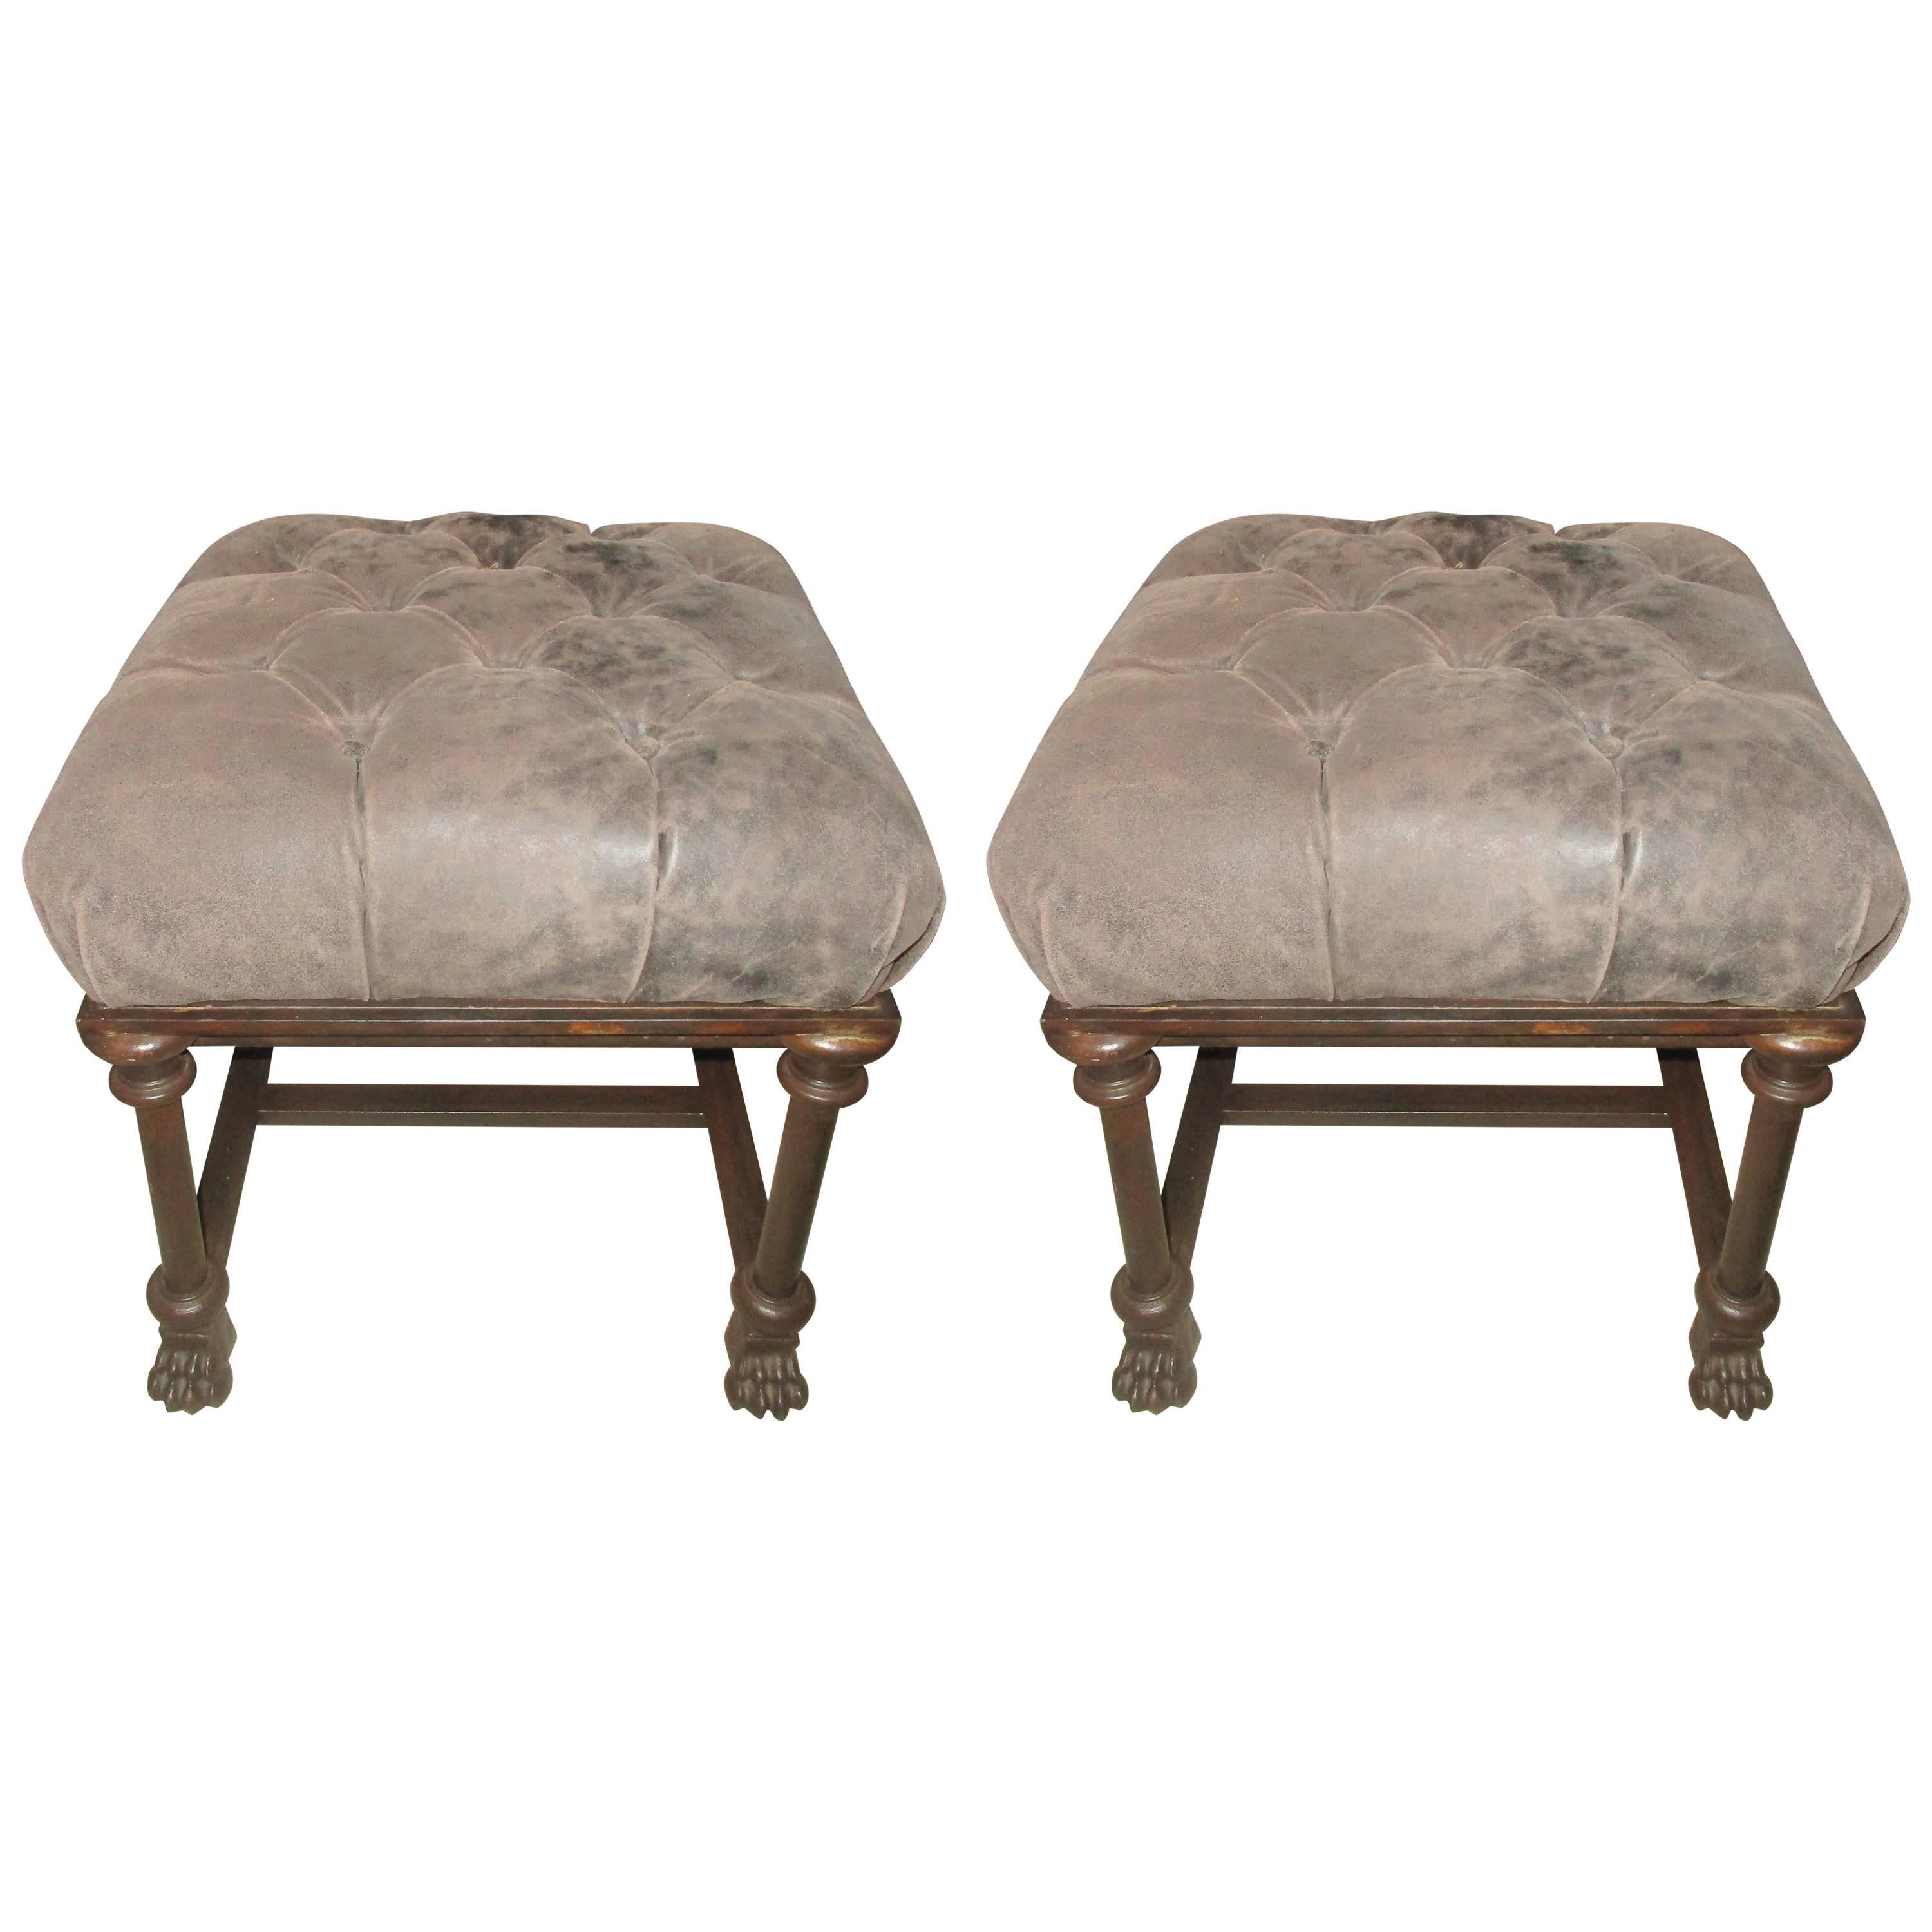 Pair of Iron Suede Tufted French Benches